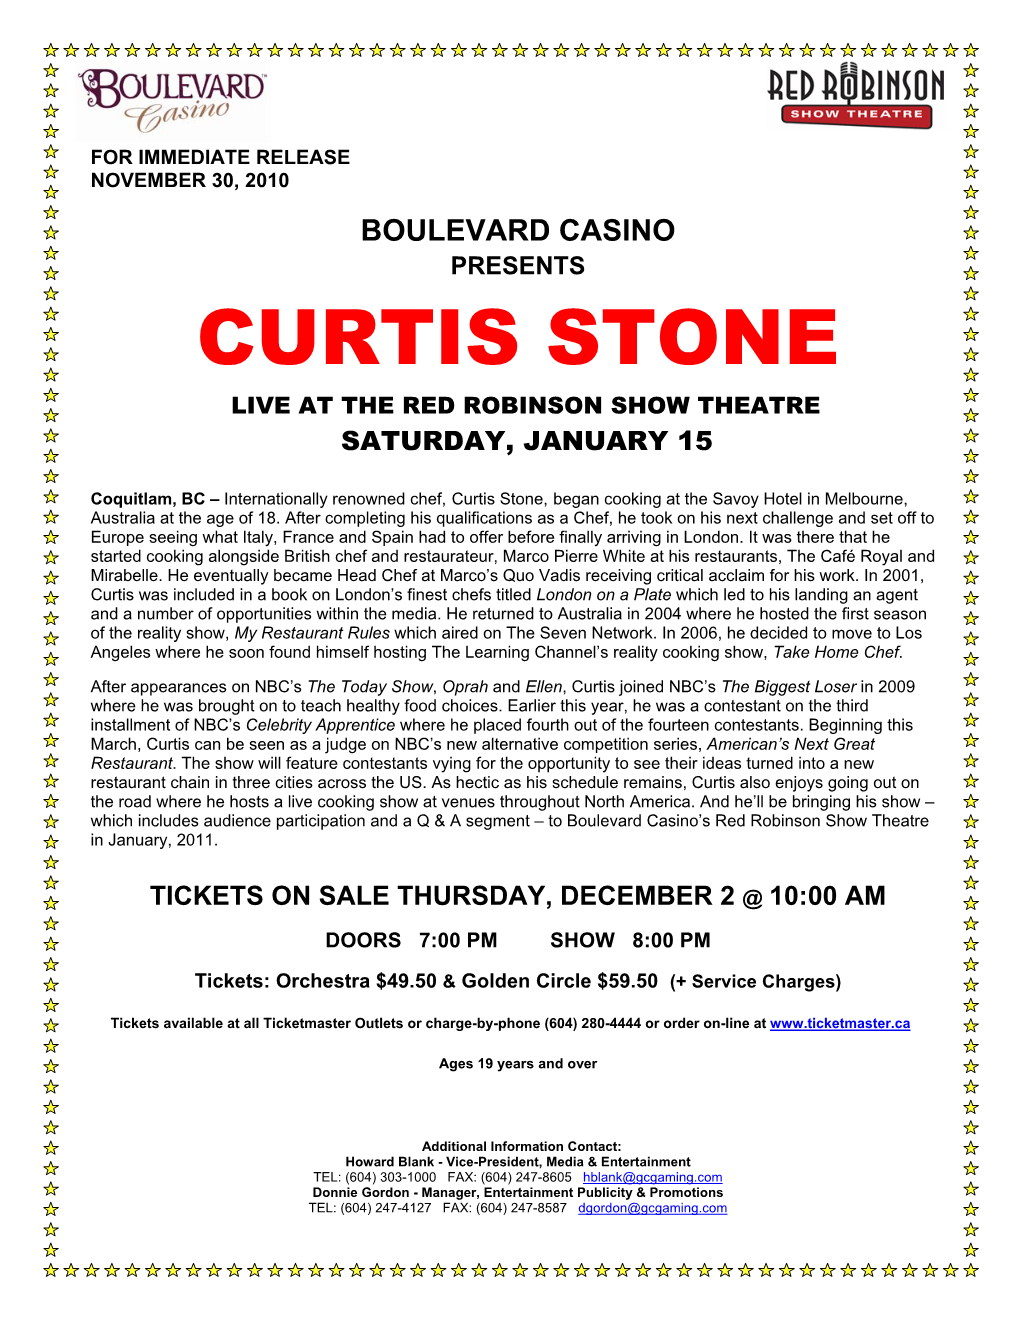 Curtis Stone Live at the Red Robinson Show Theatre